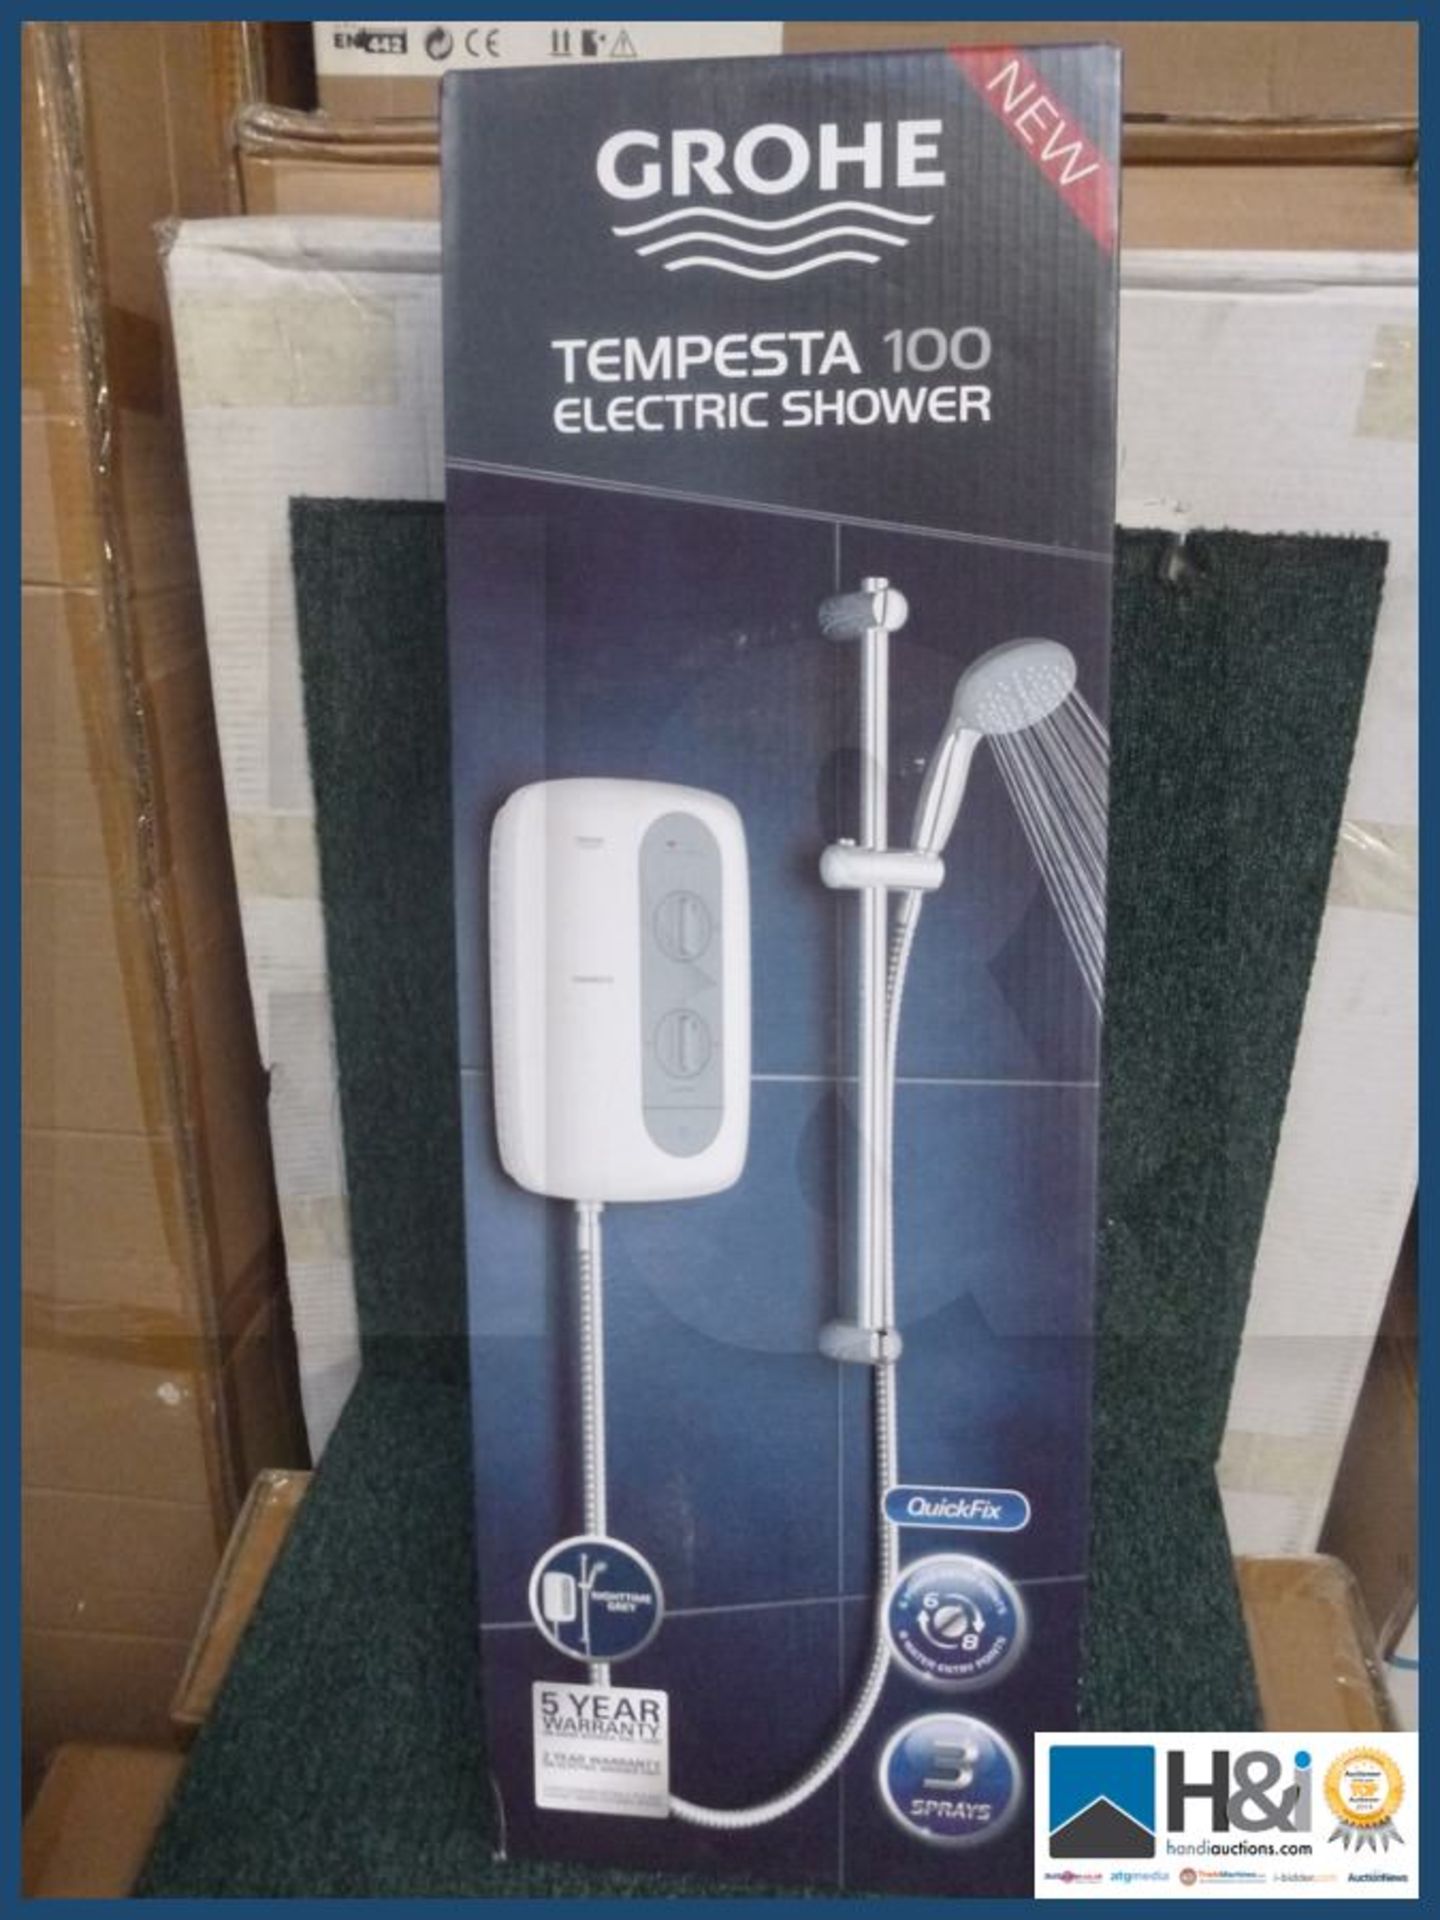 Grohe tempesta 100 (9.5kw) electric shower with shower rail kit .RRP 395 GBP.